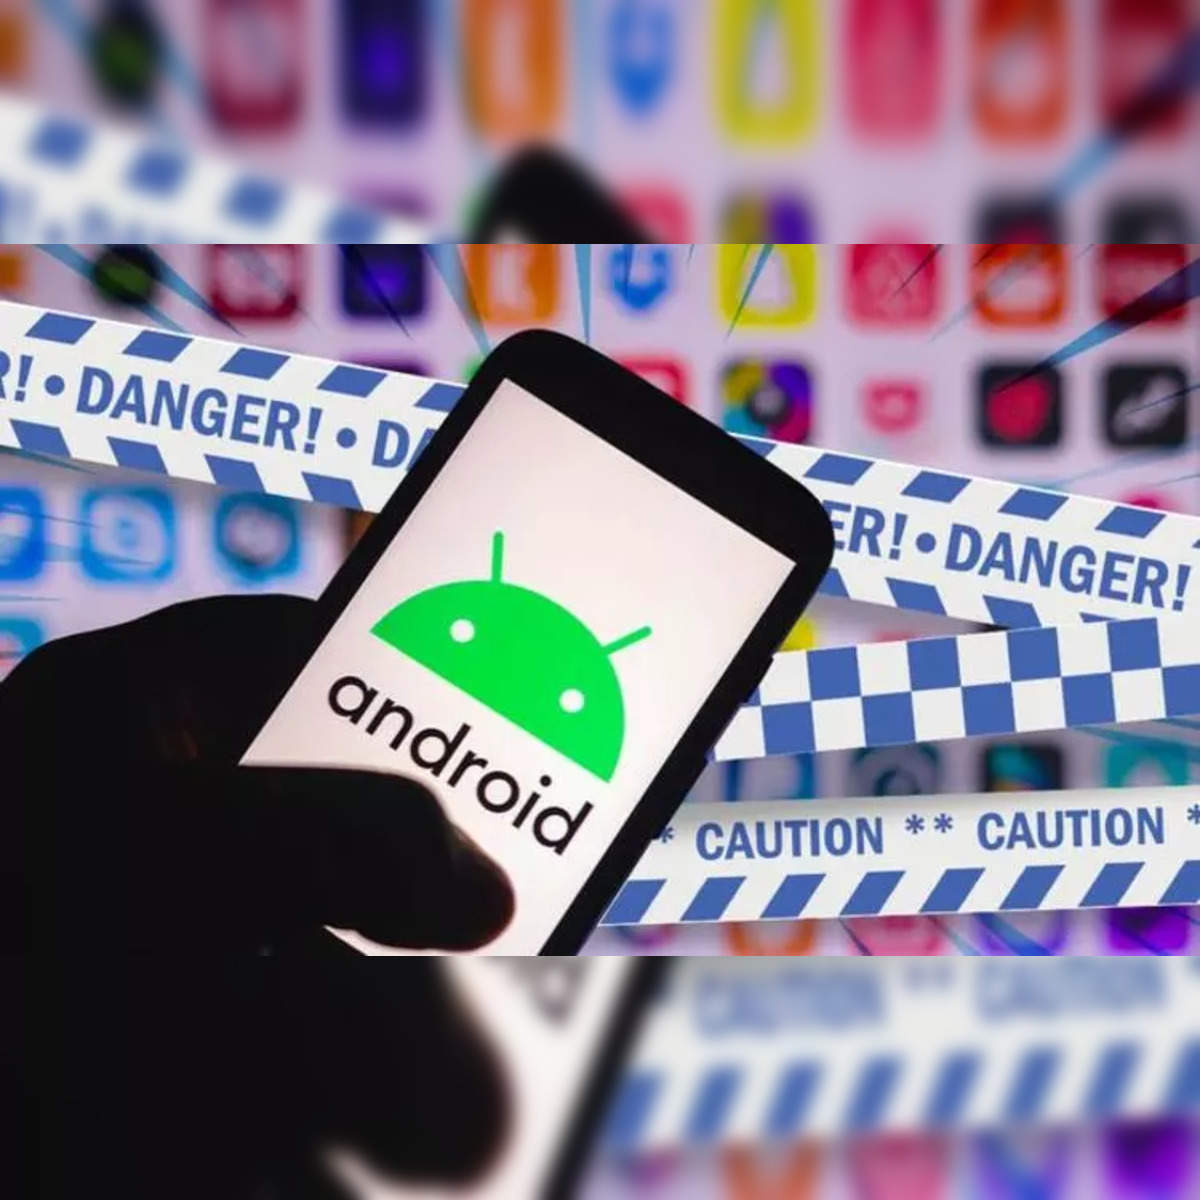 Google Play Store bans 190,000 malicious developer accounts - deletes 1.2  million Android apps 